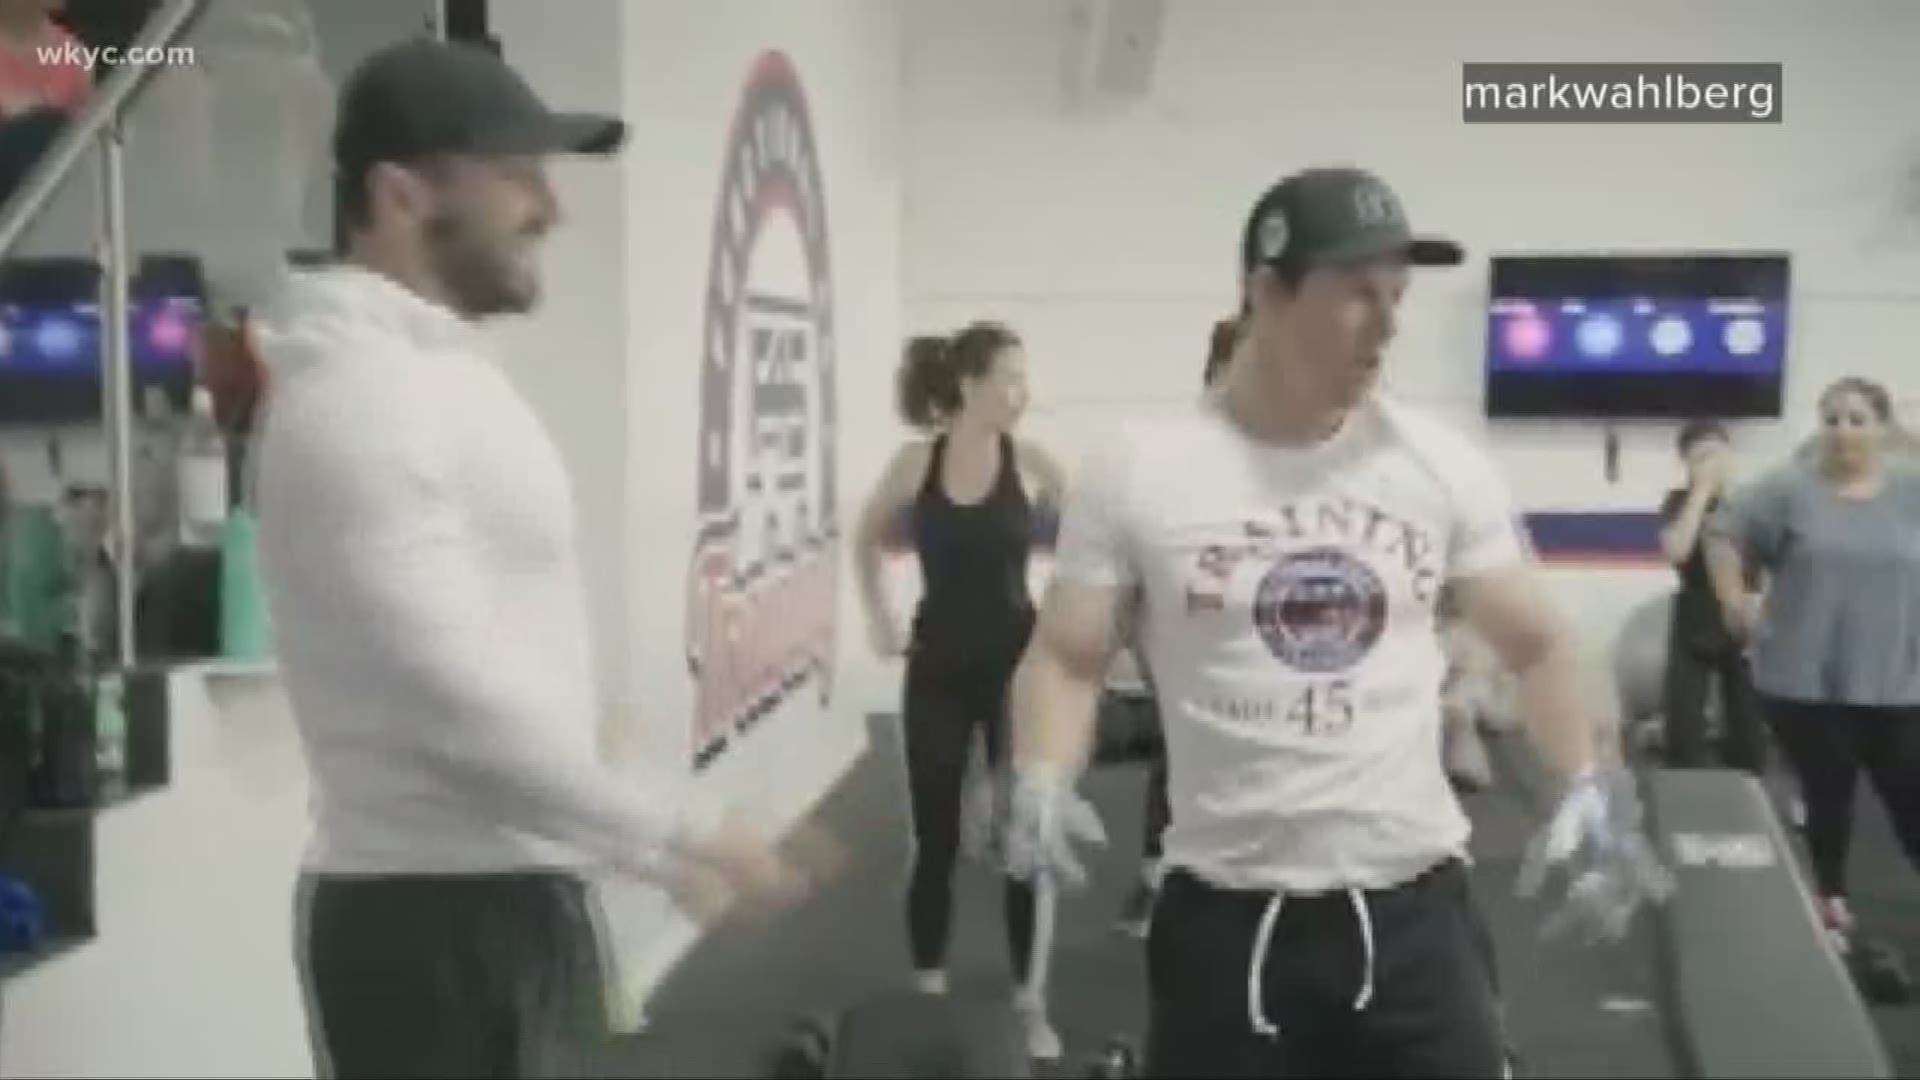 While at an F45 Functional Training Center, Baker Mayfield was pushed to his limits by Mark Wahlberg.